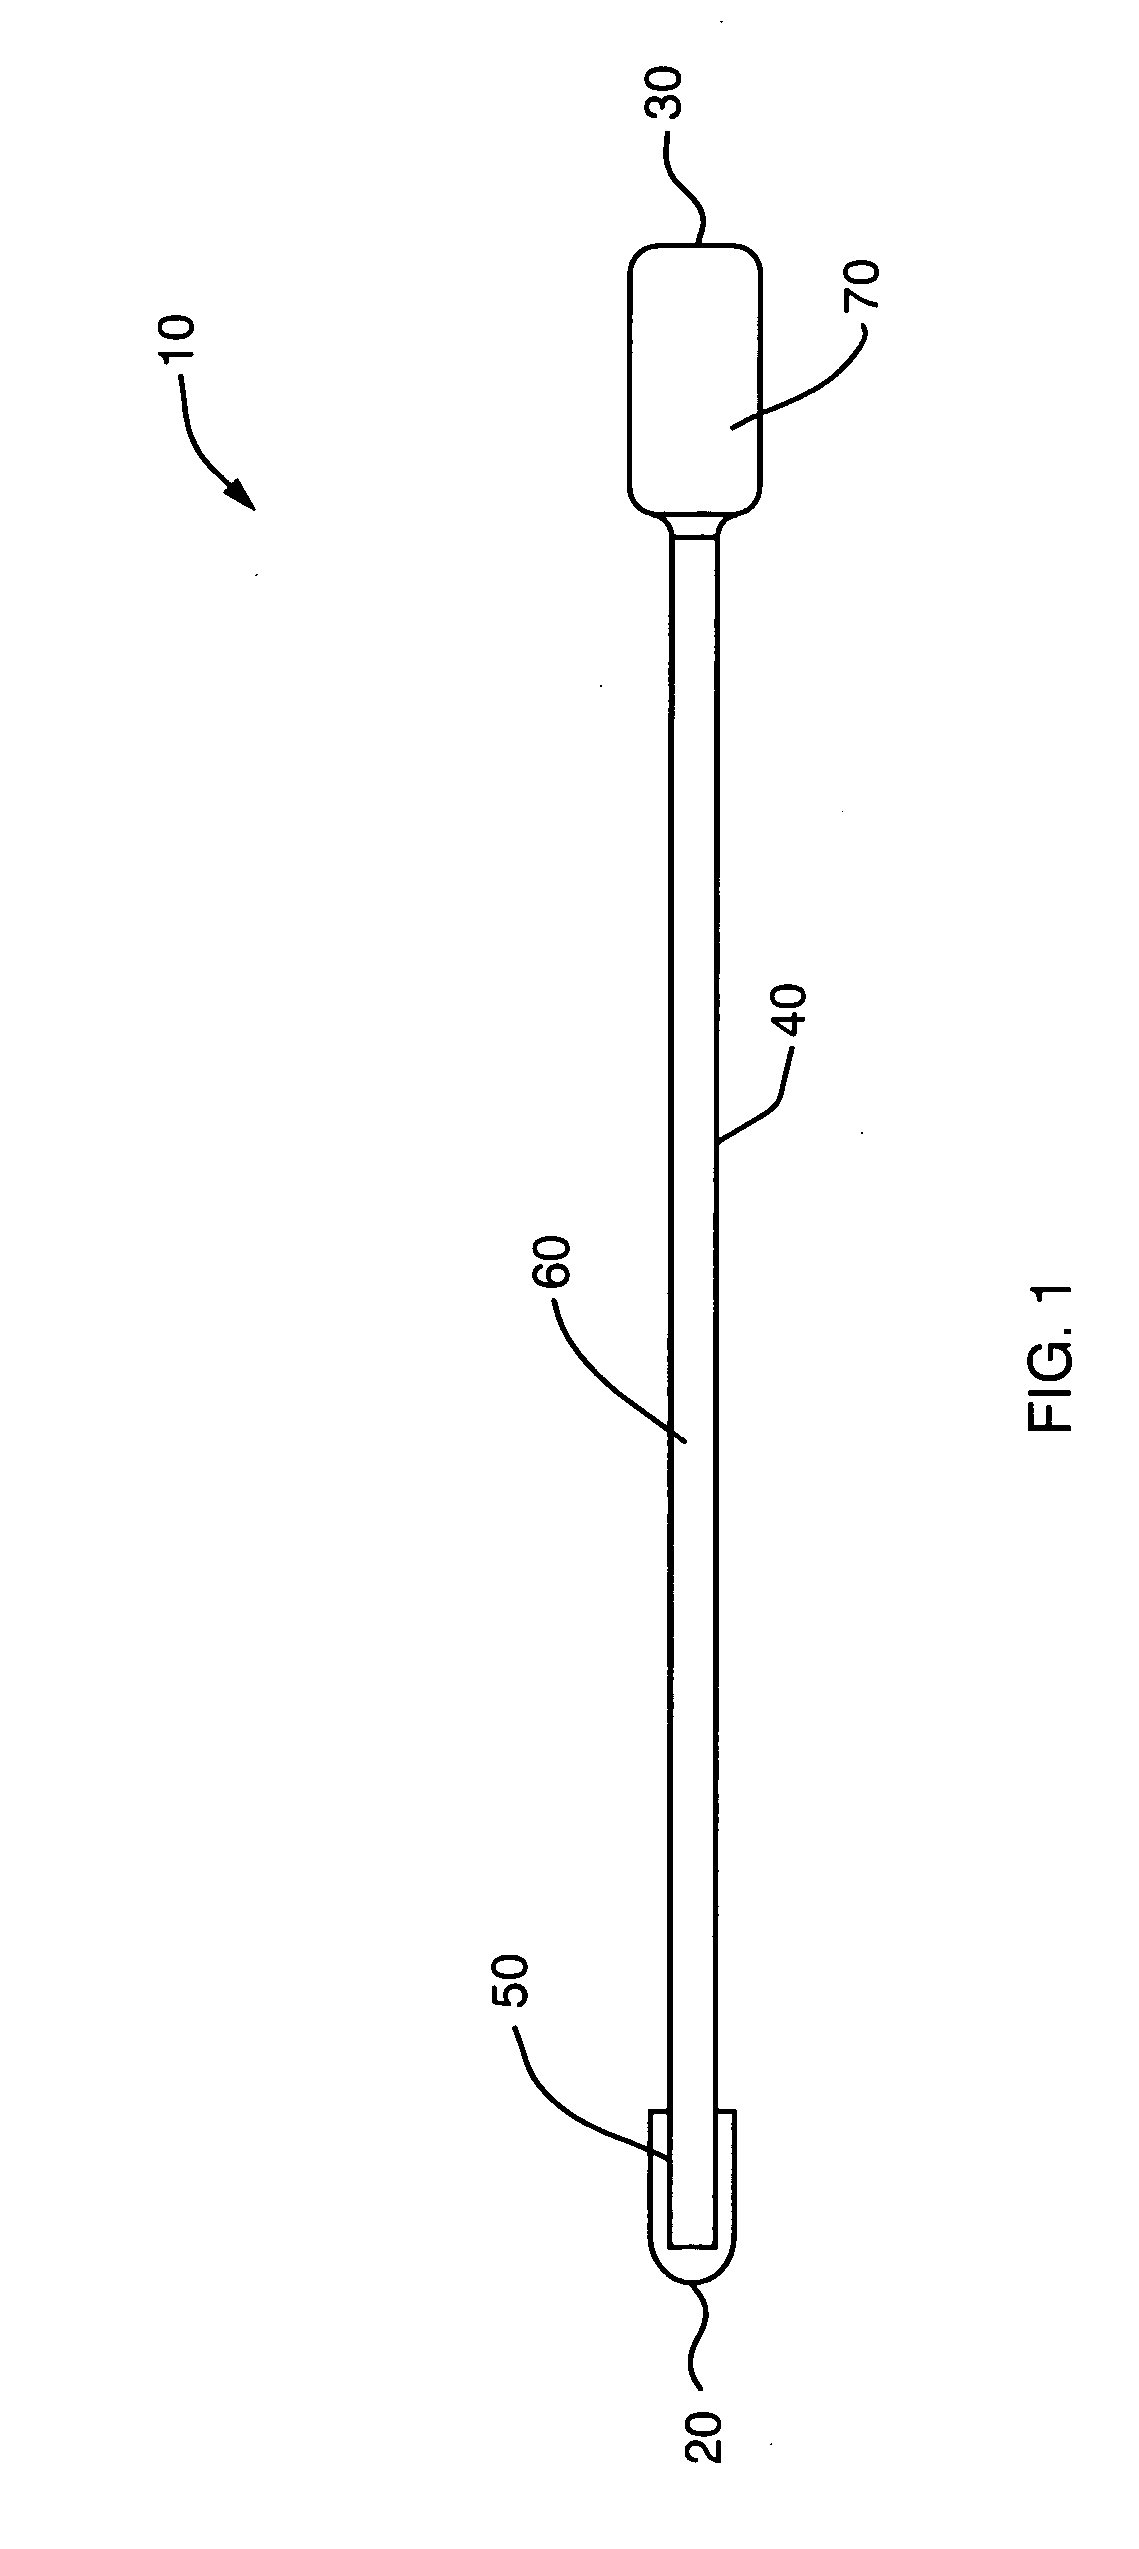 Cell collection device